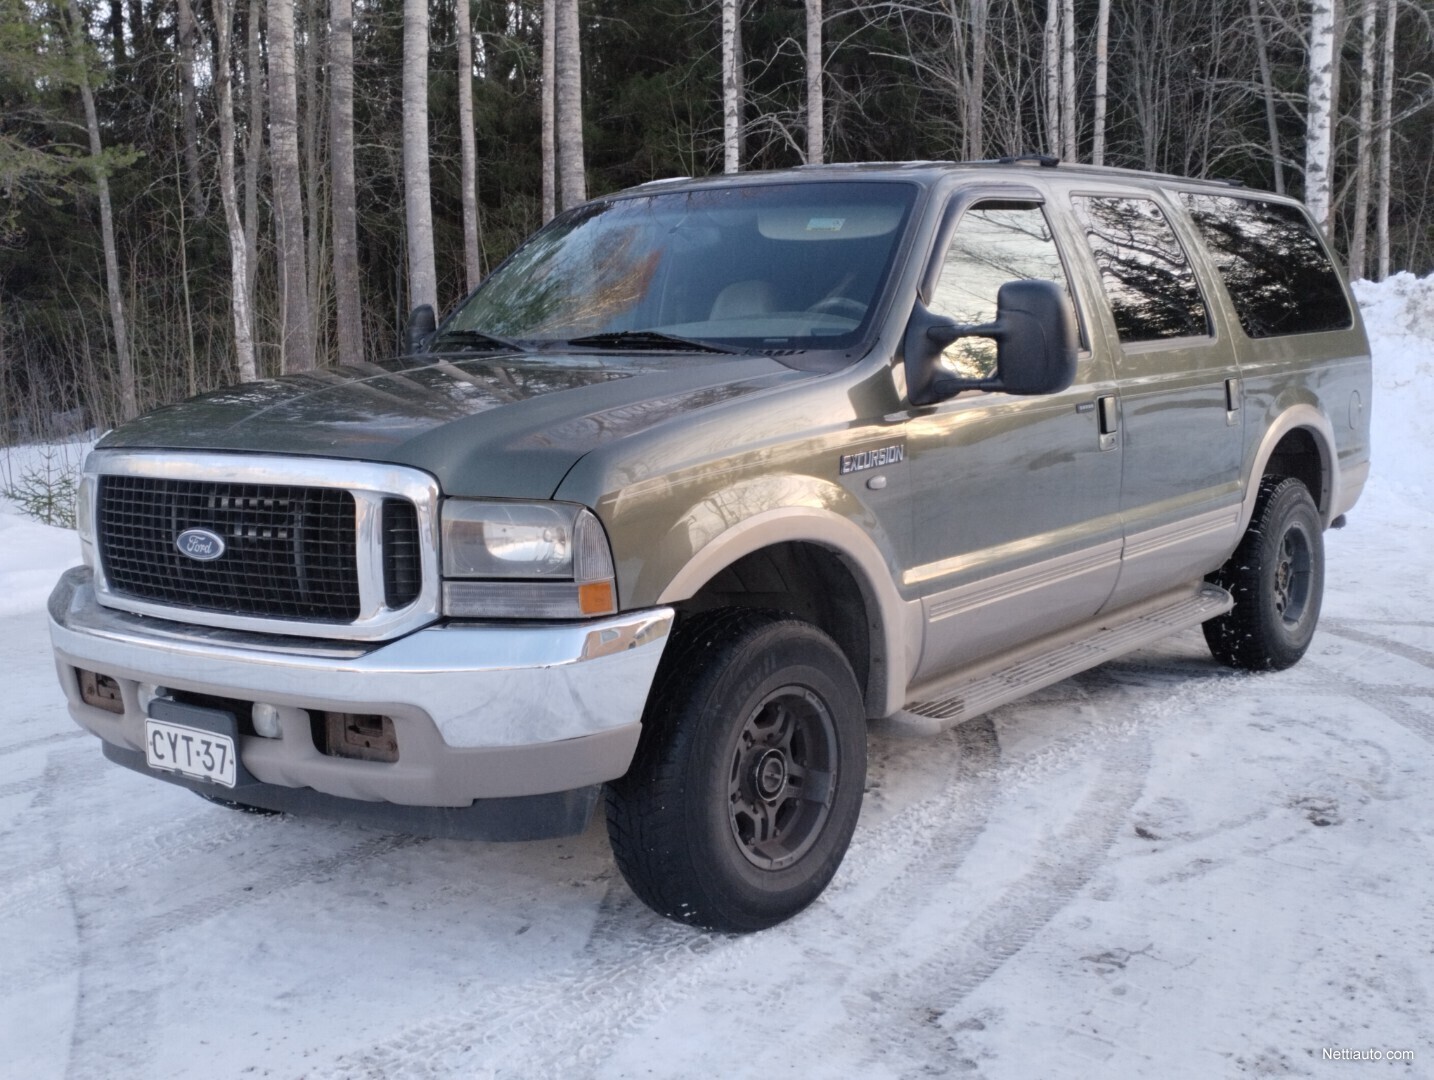 Ford Excursion 7.3 Limited All-terrain SUV 2001 - Used vehicle